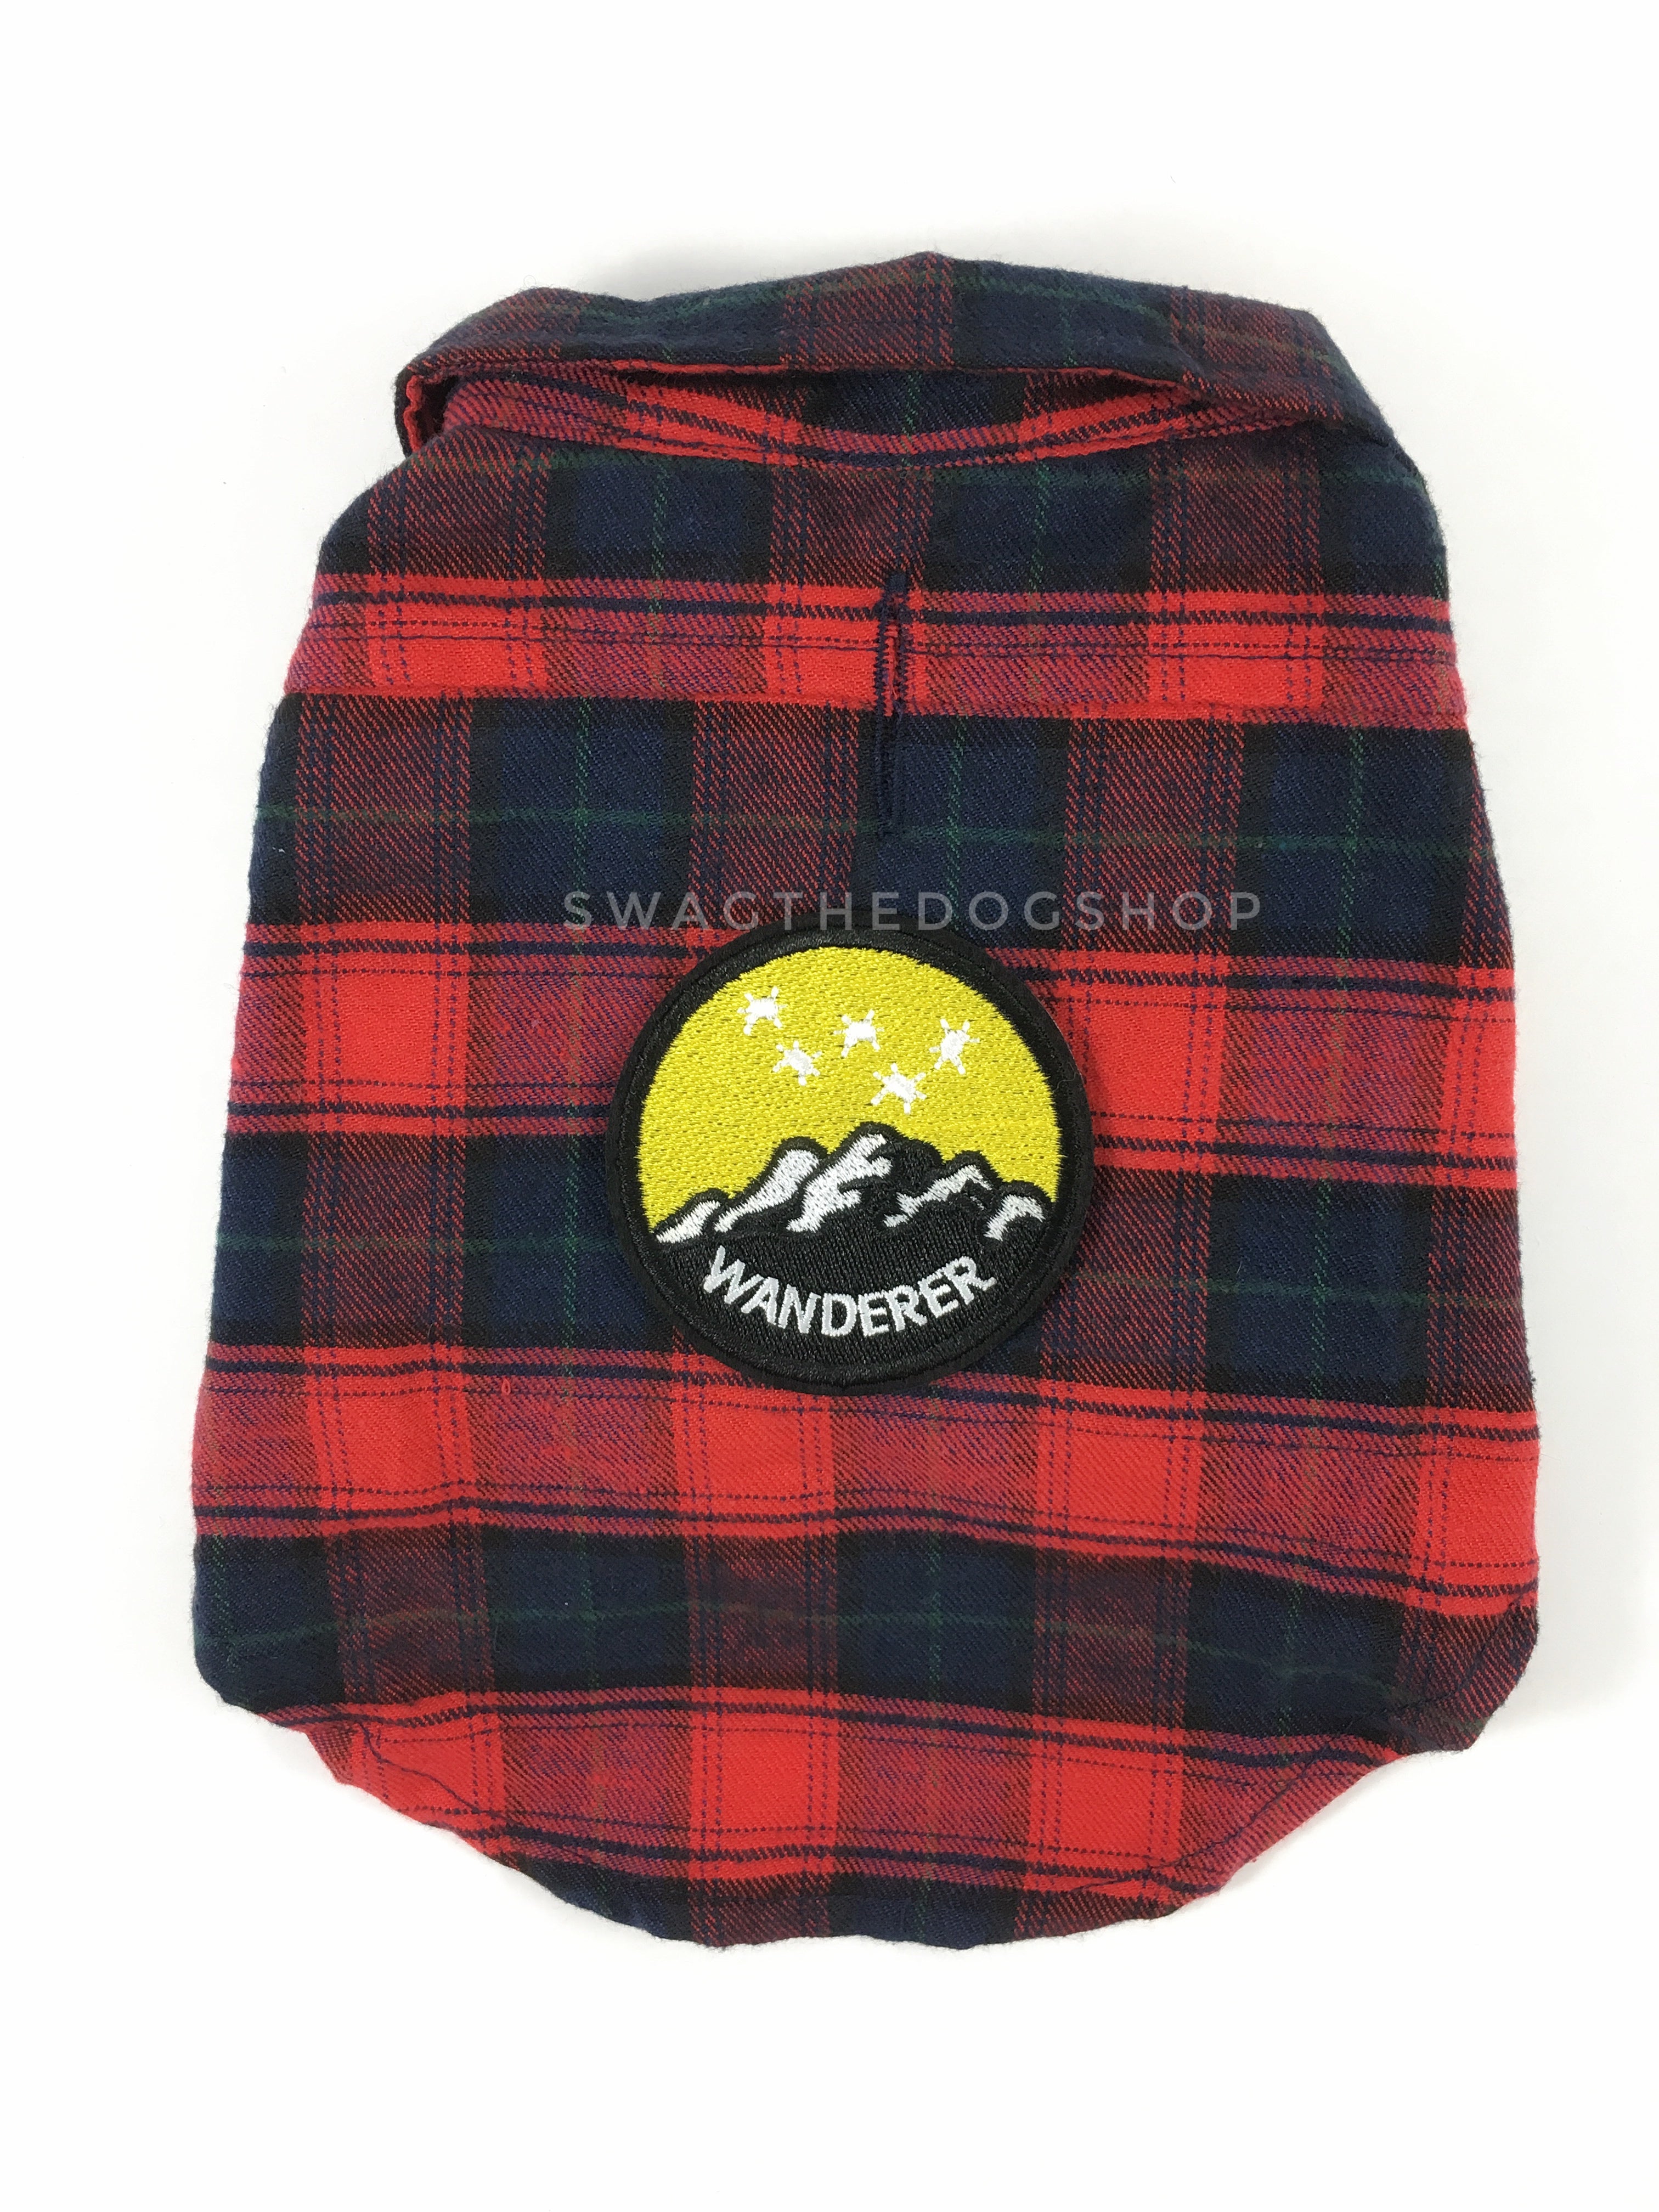 True North Red Plaid Shirt - Patch Option of Wanderer on the Back. Red Plaid Shirt